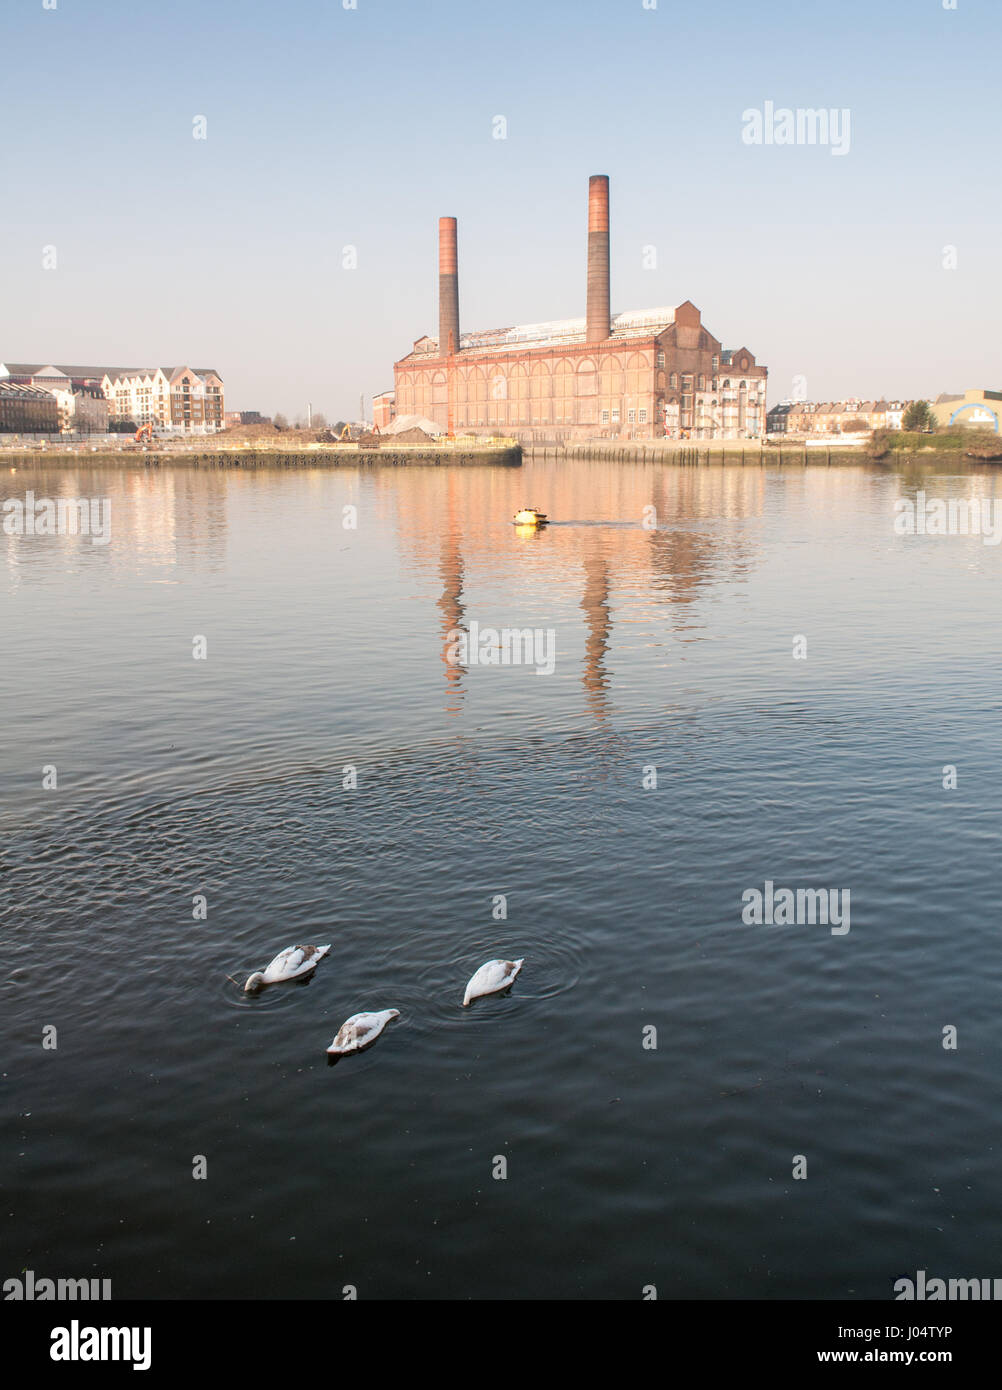 London, England, UK - March 5, 2013: Three geese swim in the River Thames at Battersea Reach in west London, with chimneys of Lots Road Power Station. Stock Photo